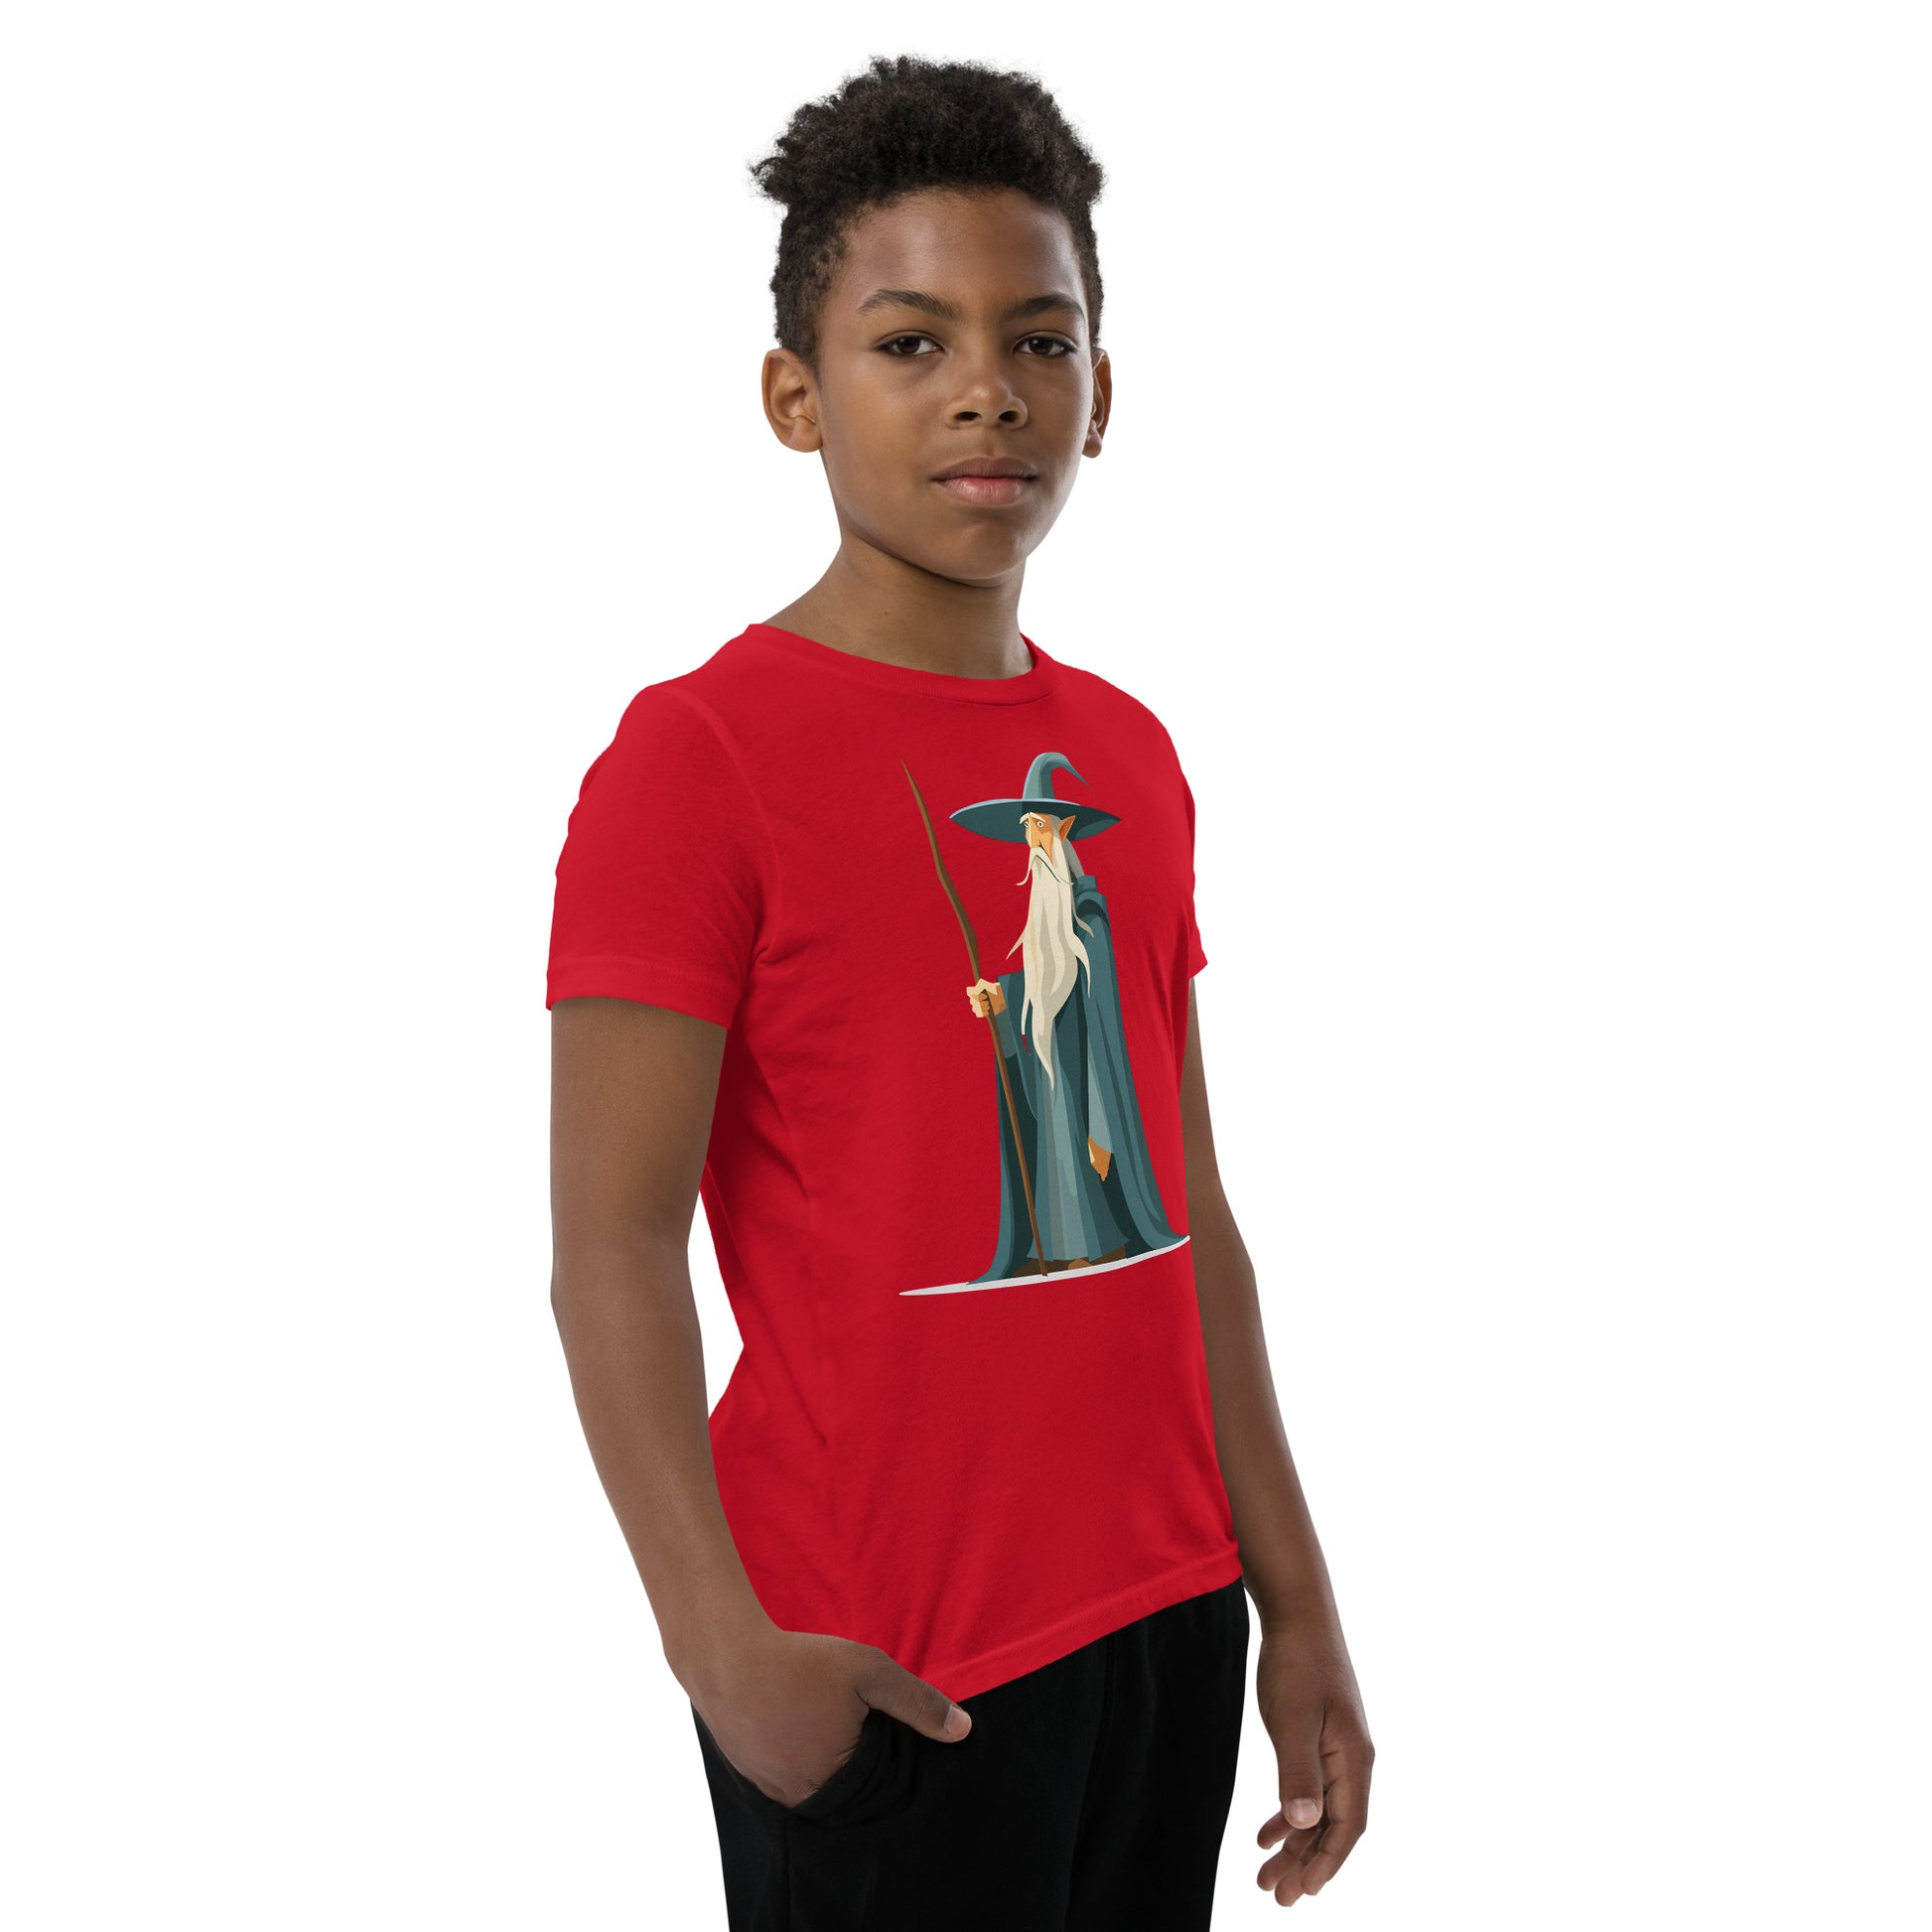 Boy with a red T-shirt with a picture of a magician